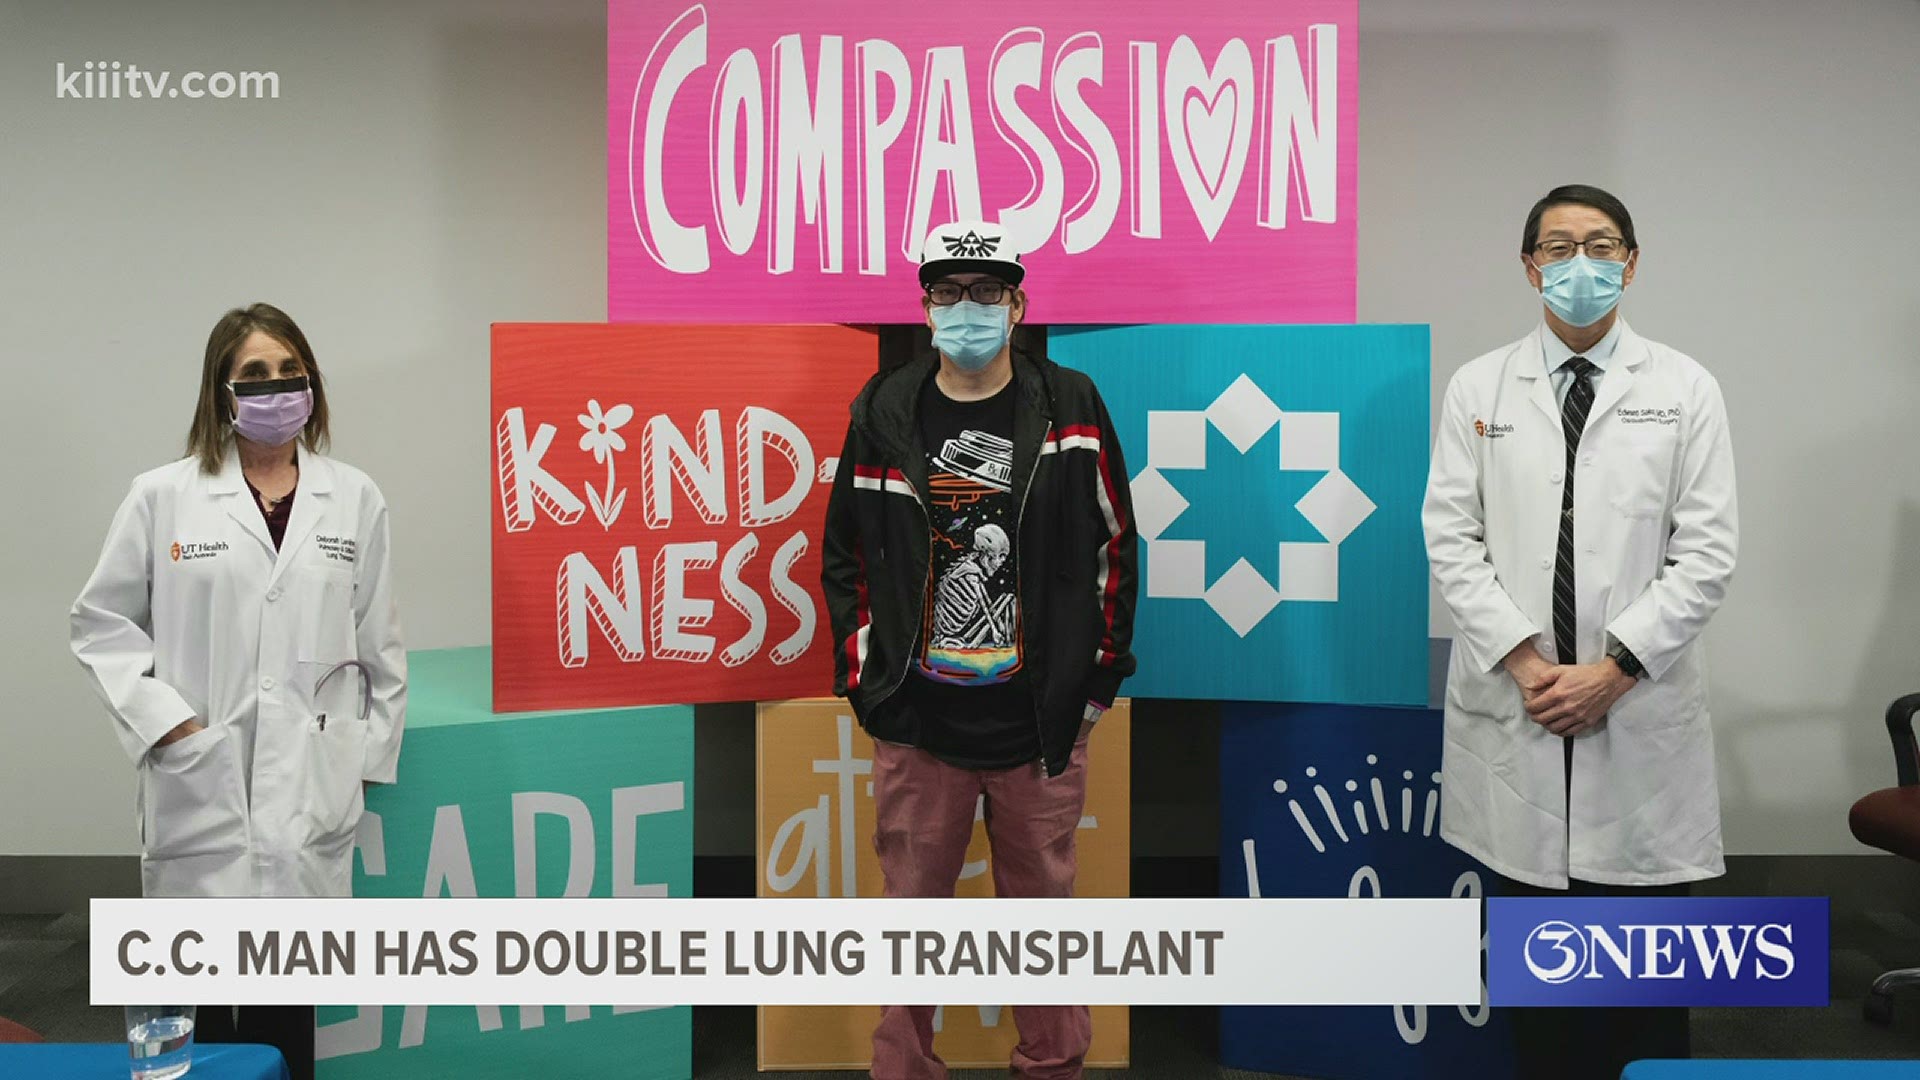 Jose Sosa is the first patient in South Texas, and one of the first in the country, to receive a double lung transplant after catching COVID-19.